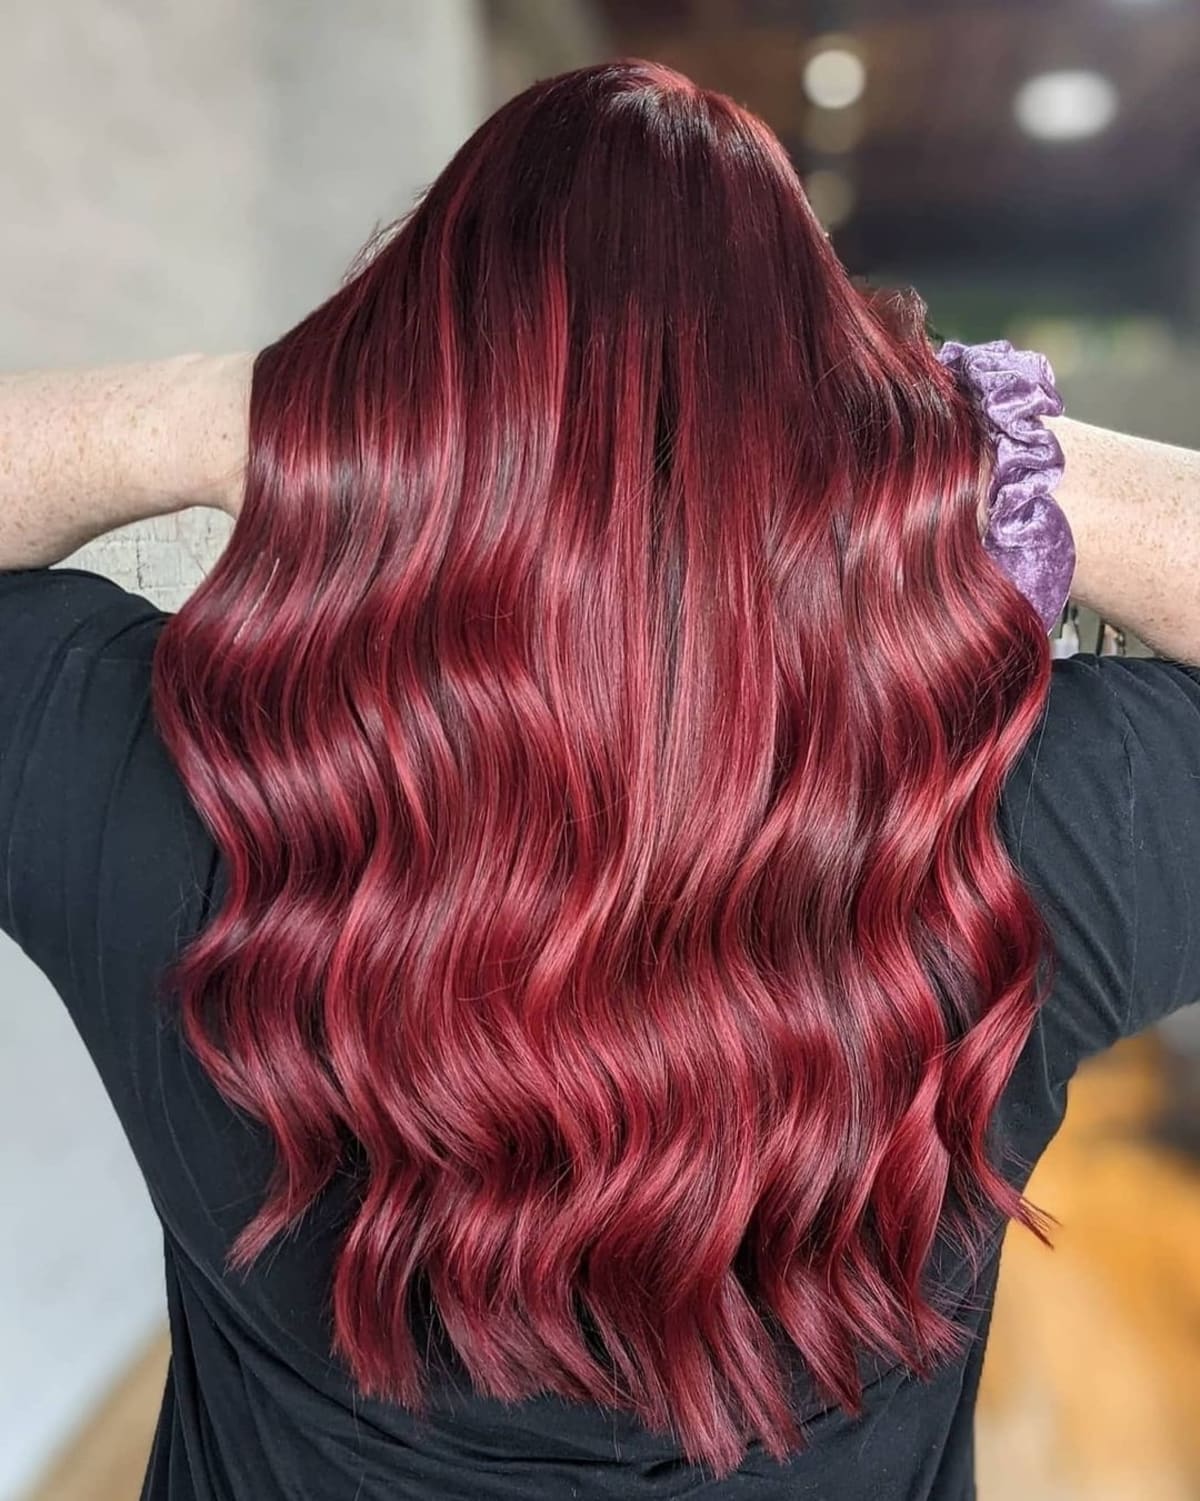 35 Ideas For Red Velvet Hair Color You Will Fall In Love With